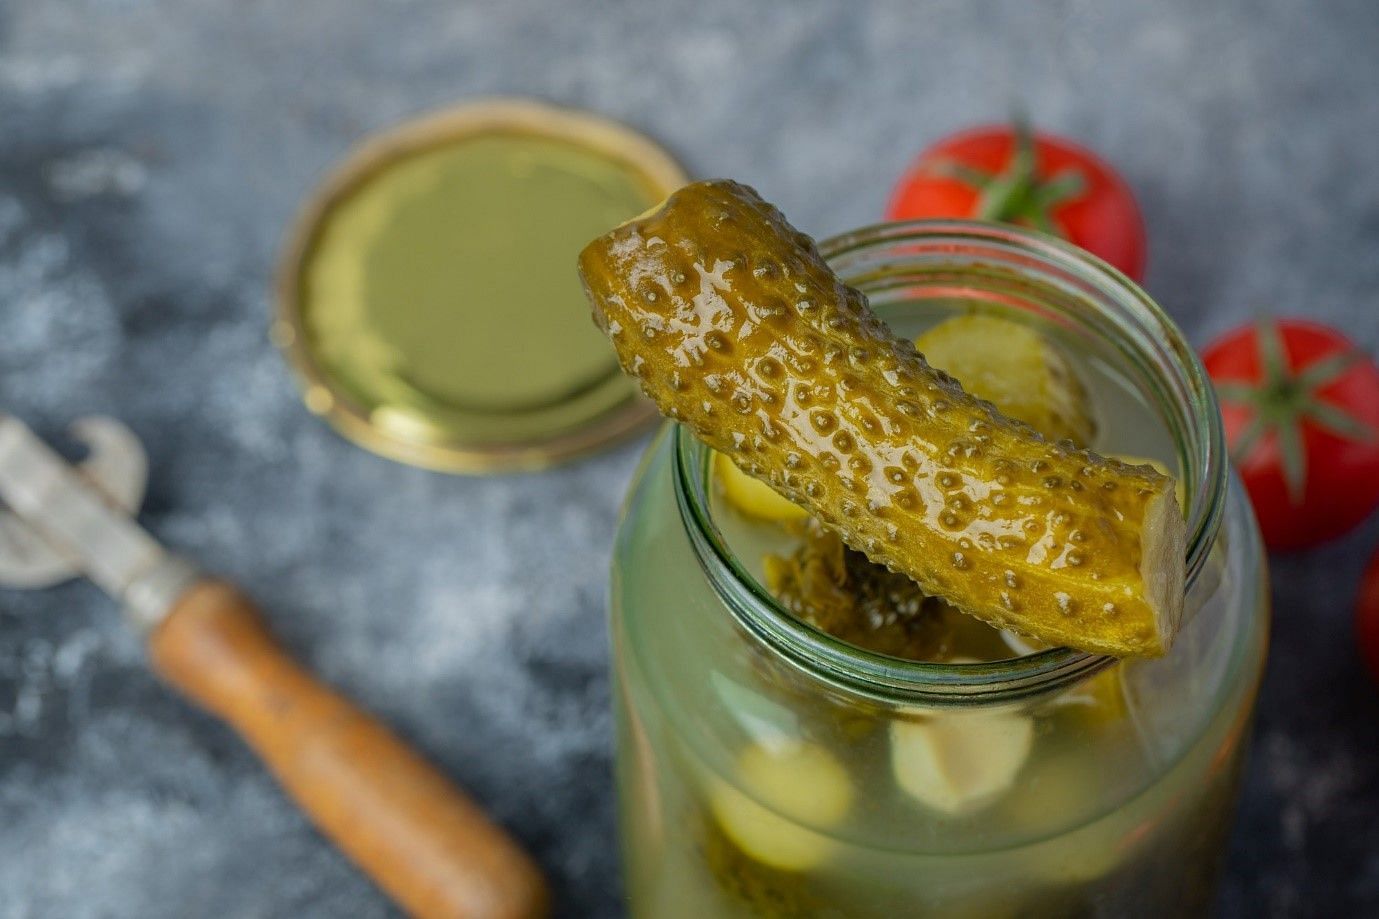 What are the benefits of pickle juice? (image by Azerbaijan_stockers on freepik)